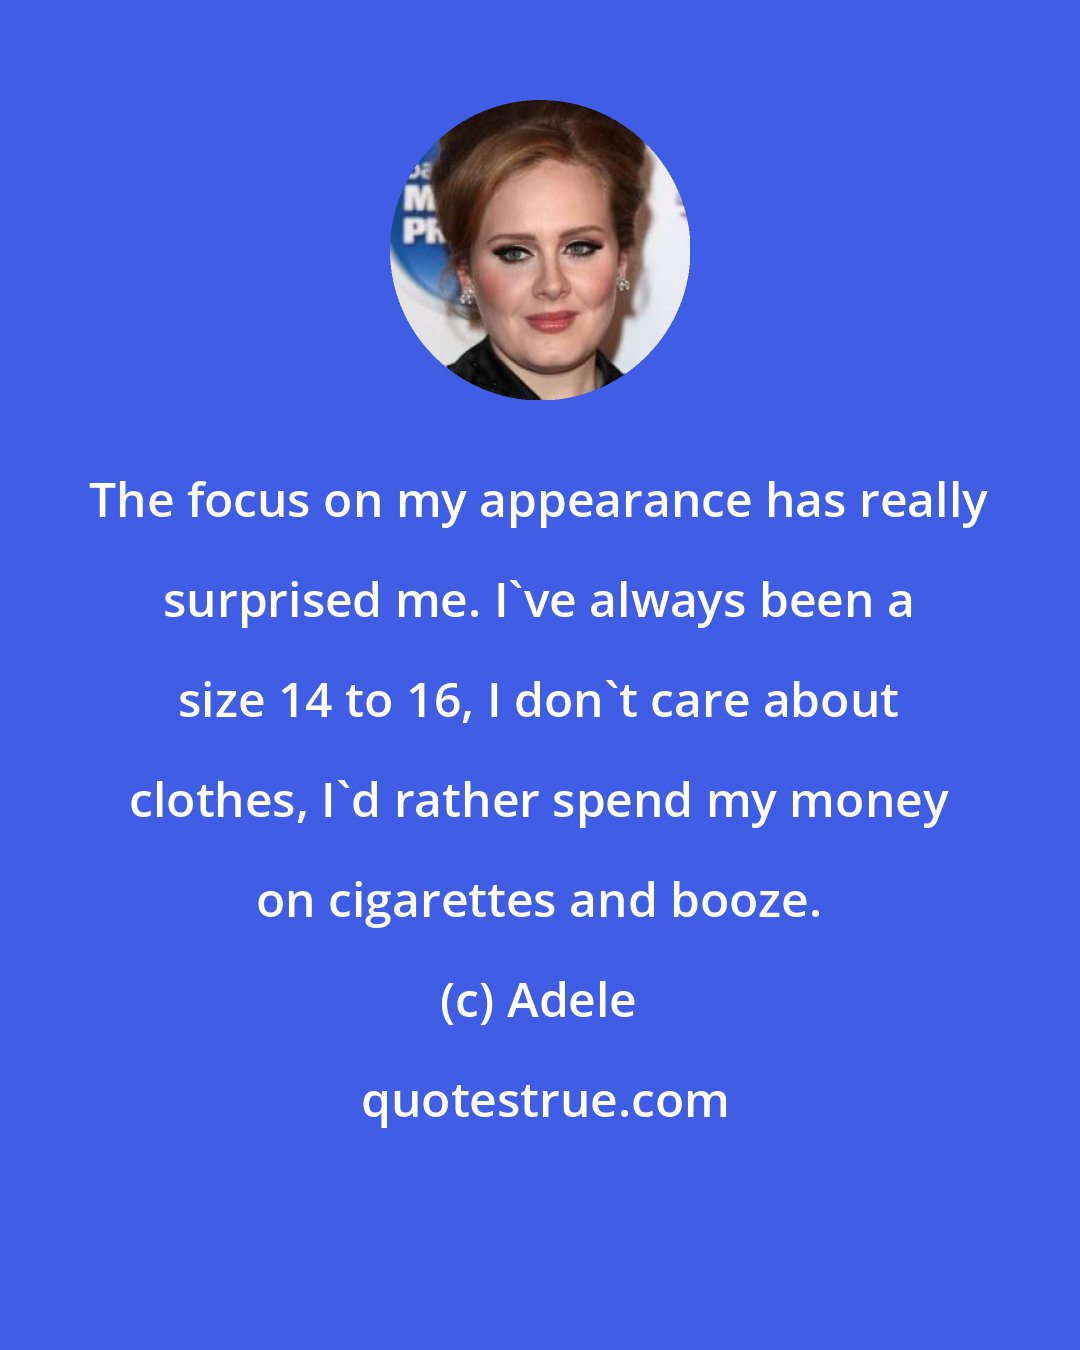 Adele: The focus on my appearance has really surprised me. I've always been a size 14 to 16, I don't care about clothes, I'd rather spend my money on cigarettes and booze.